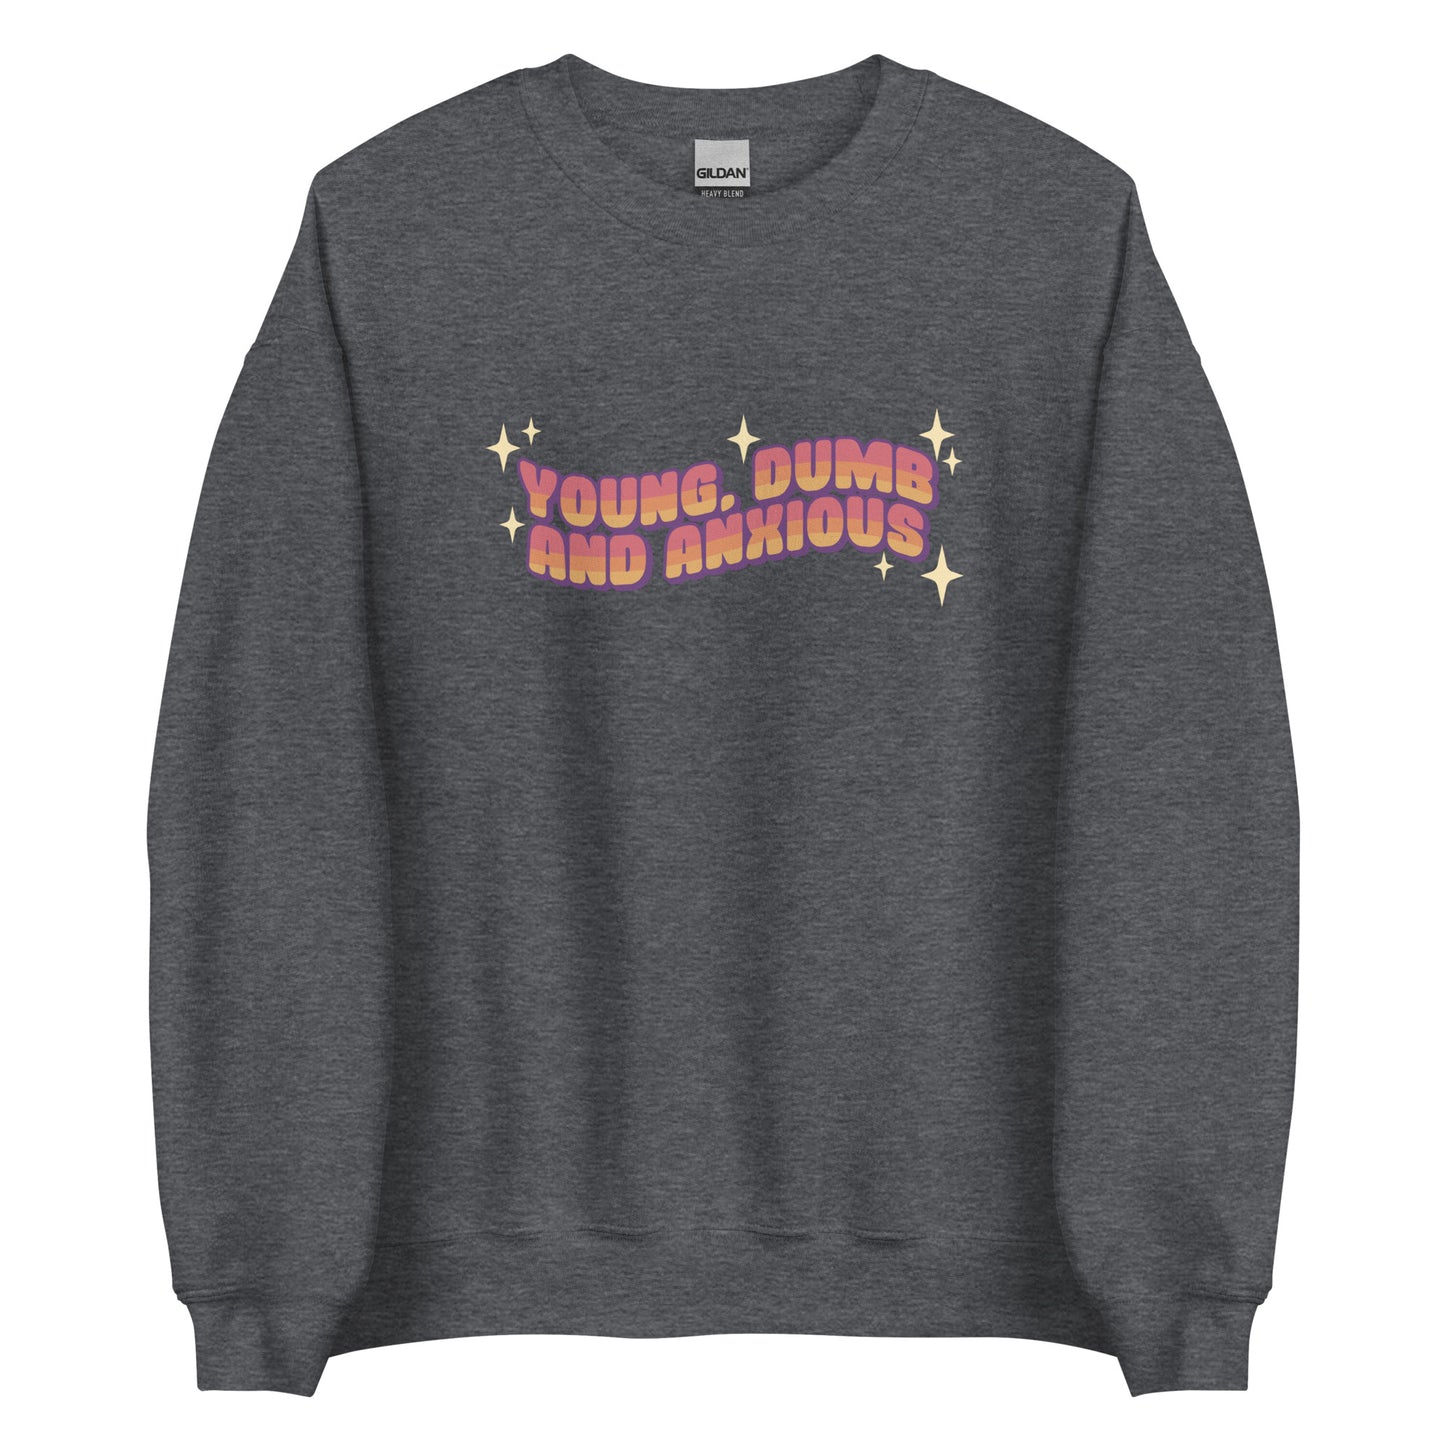 A dark grey crewneck sweatshirt featuring text in a pink-to-yellow gradient, surrounded by sparkles. The text reads "Young, dumb and anxious" in a blocky font.